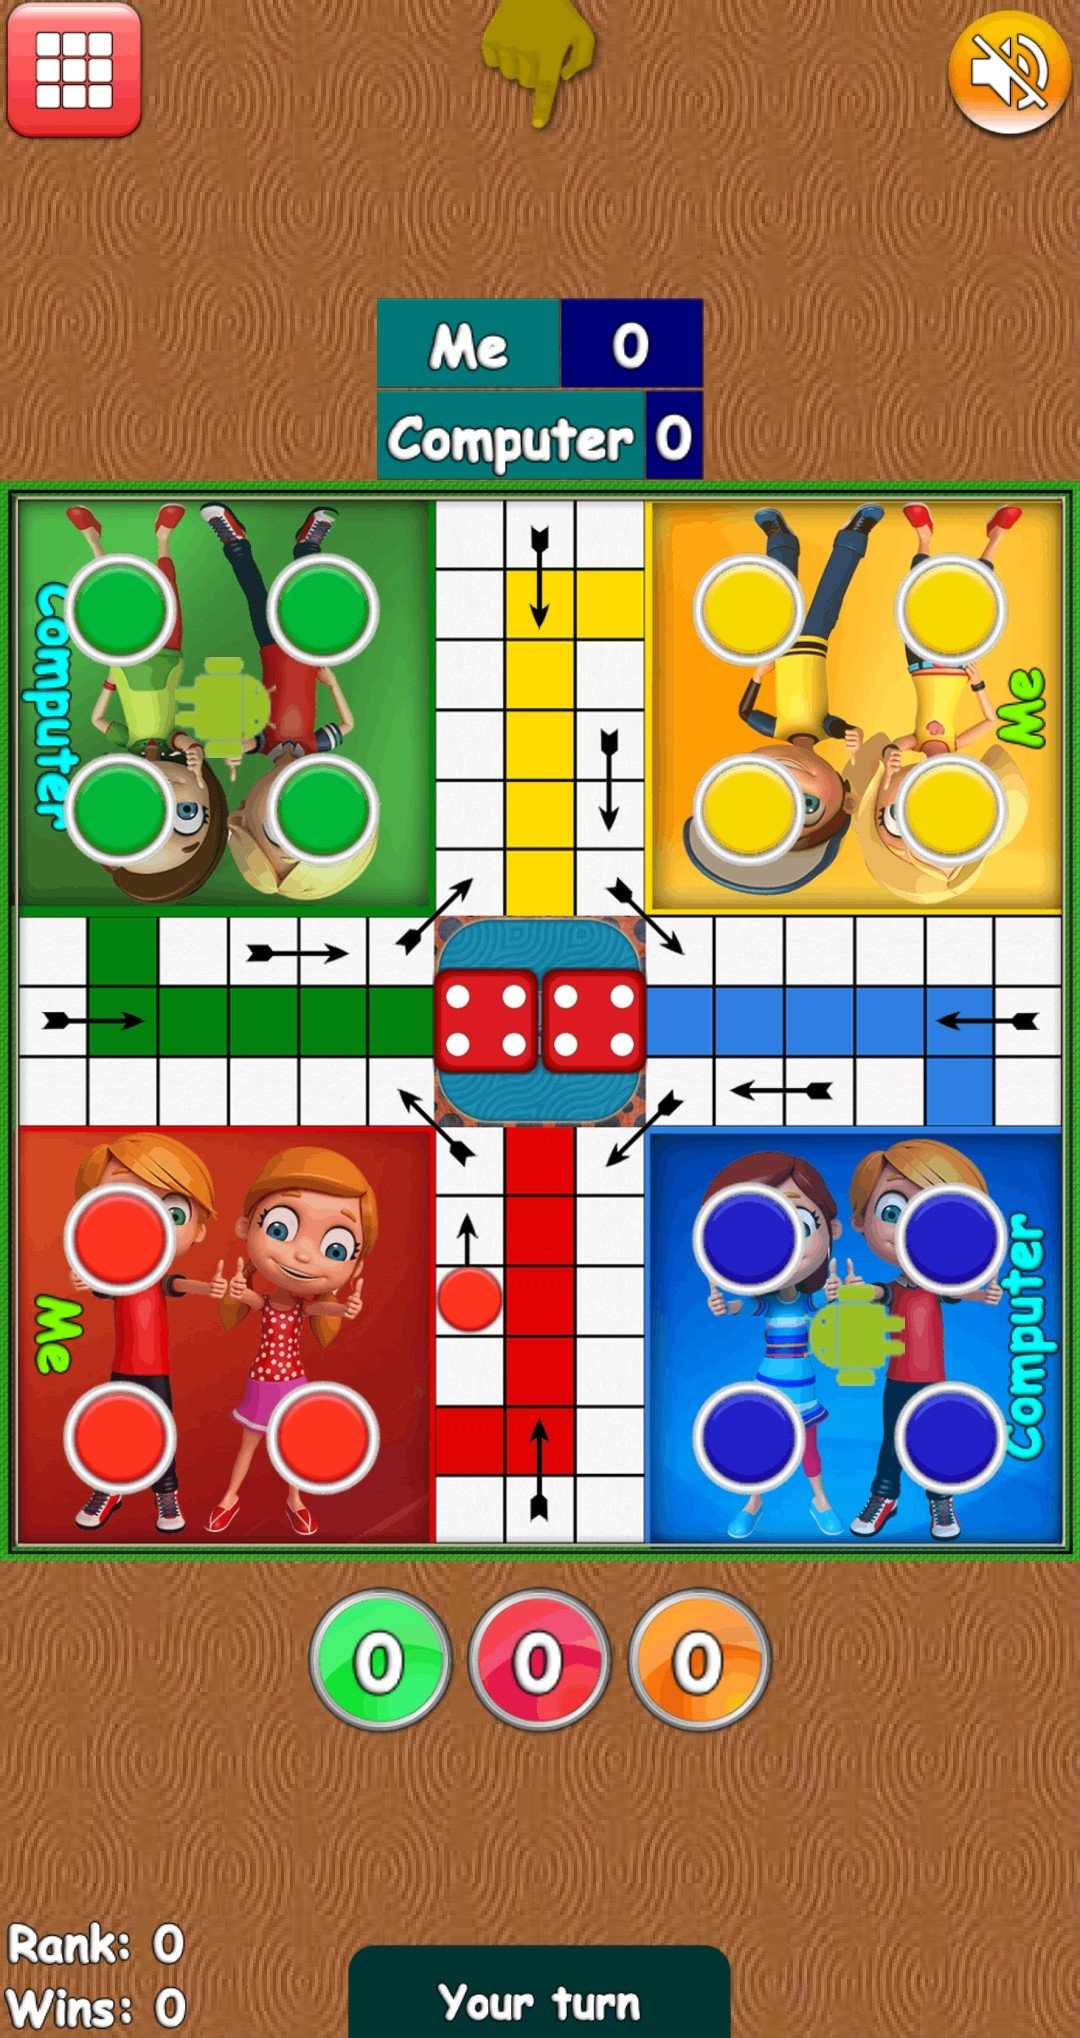 Ludo Online Game Multiplayer for Android - Free App Download